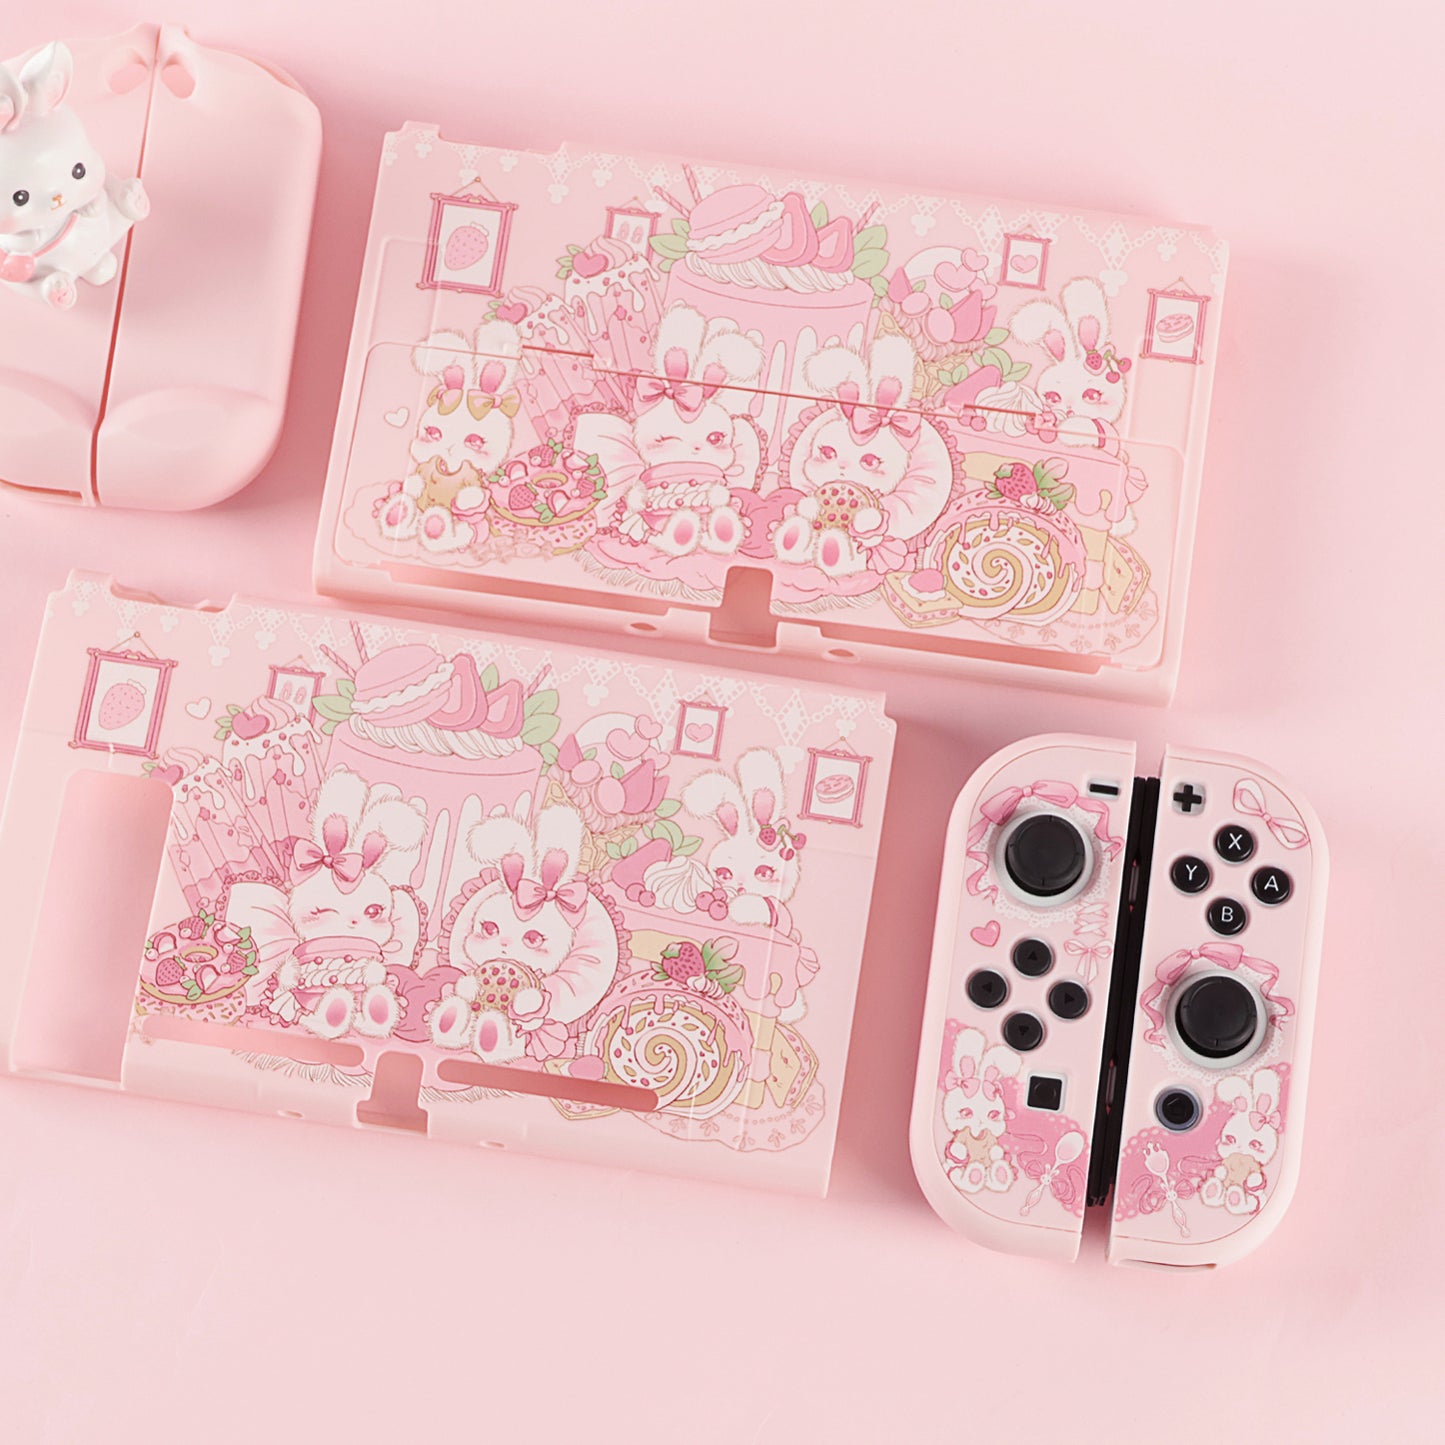 BlingKiyo Candy Bunny Protective Shell for Nintendo Switch/ Switch OLED